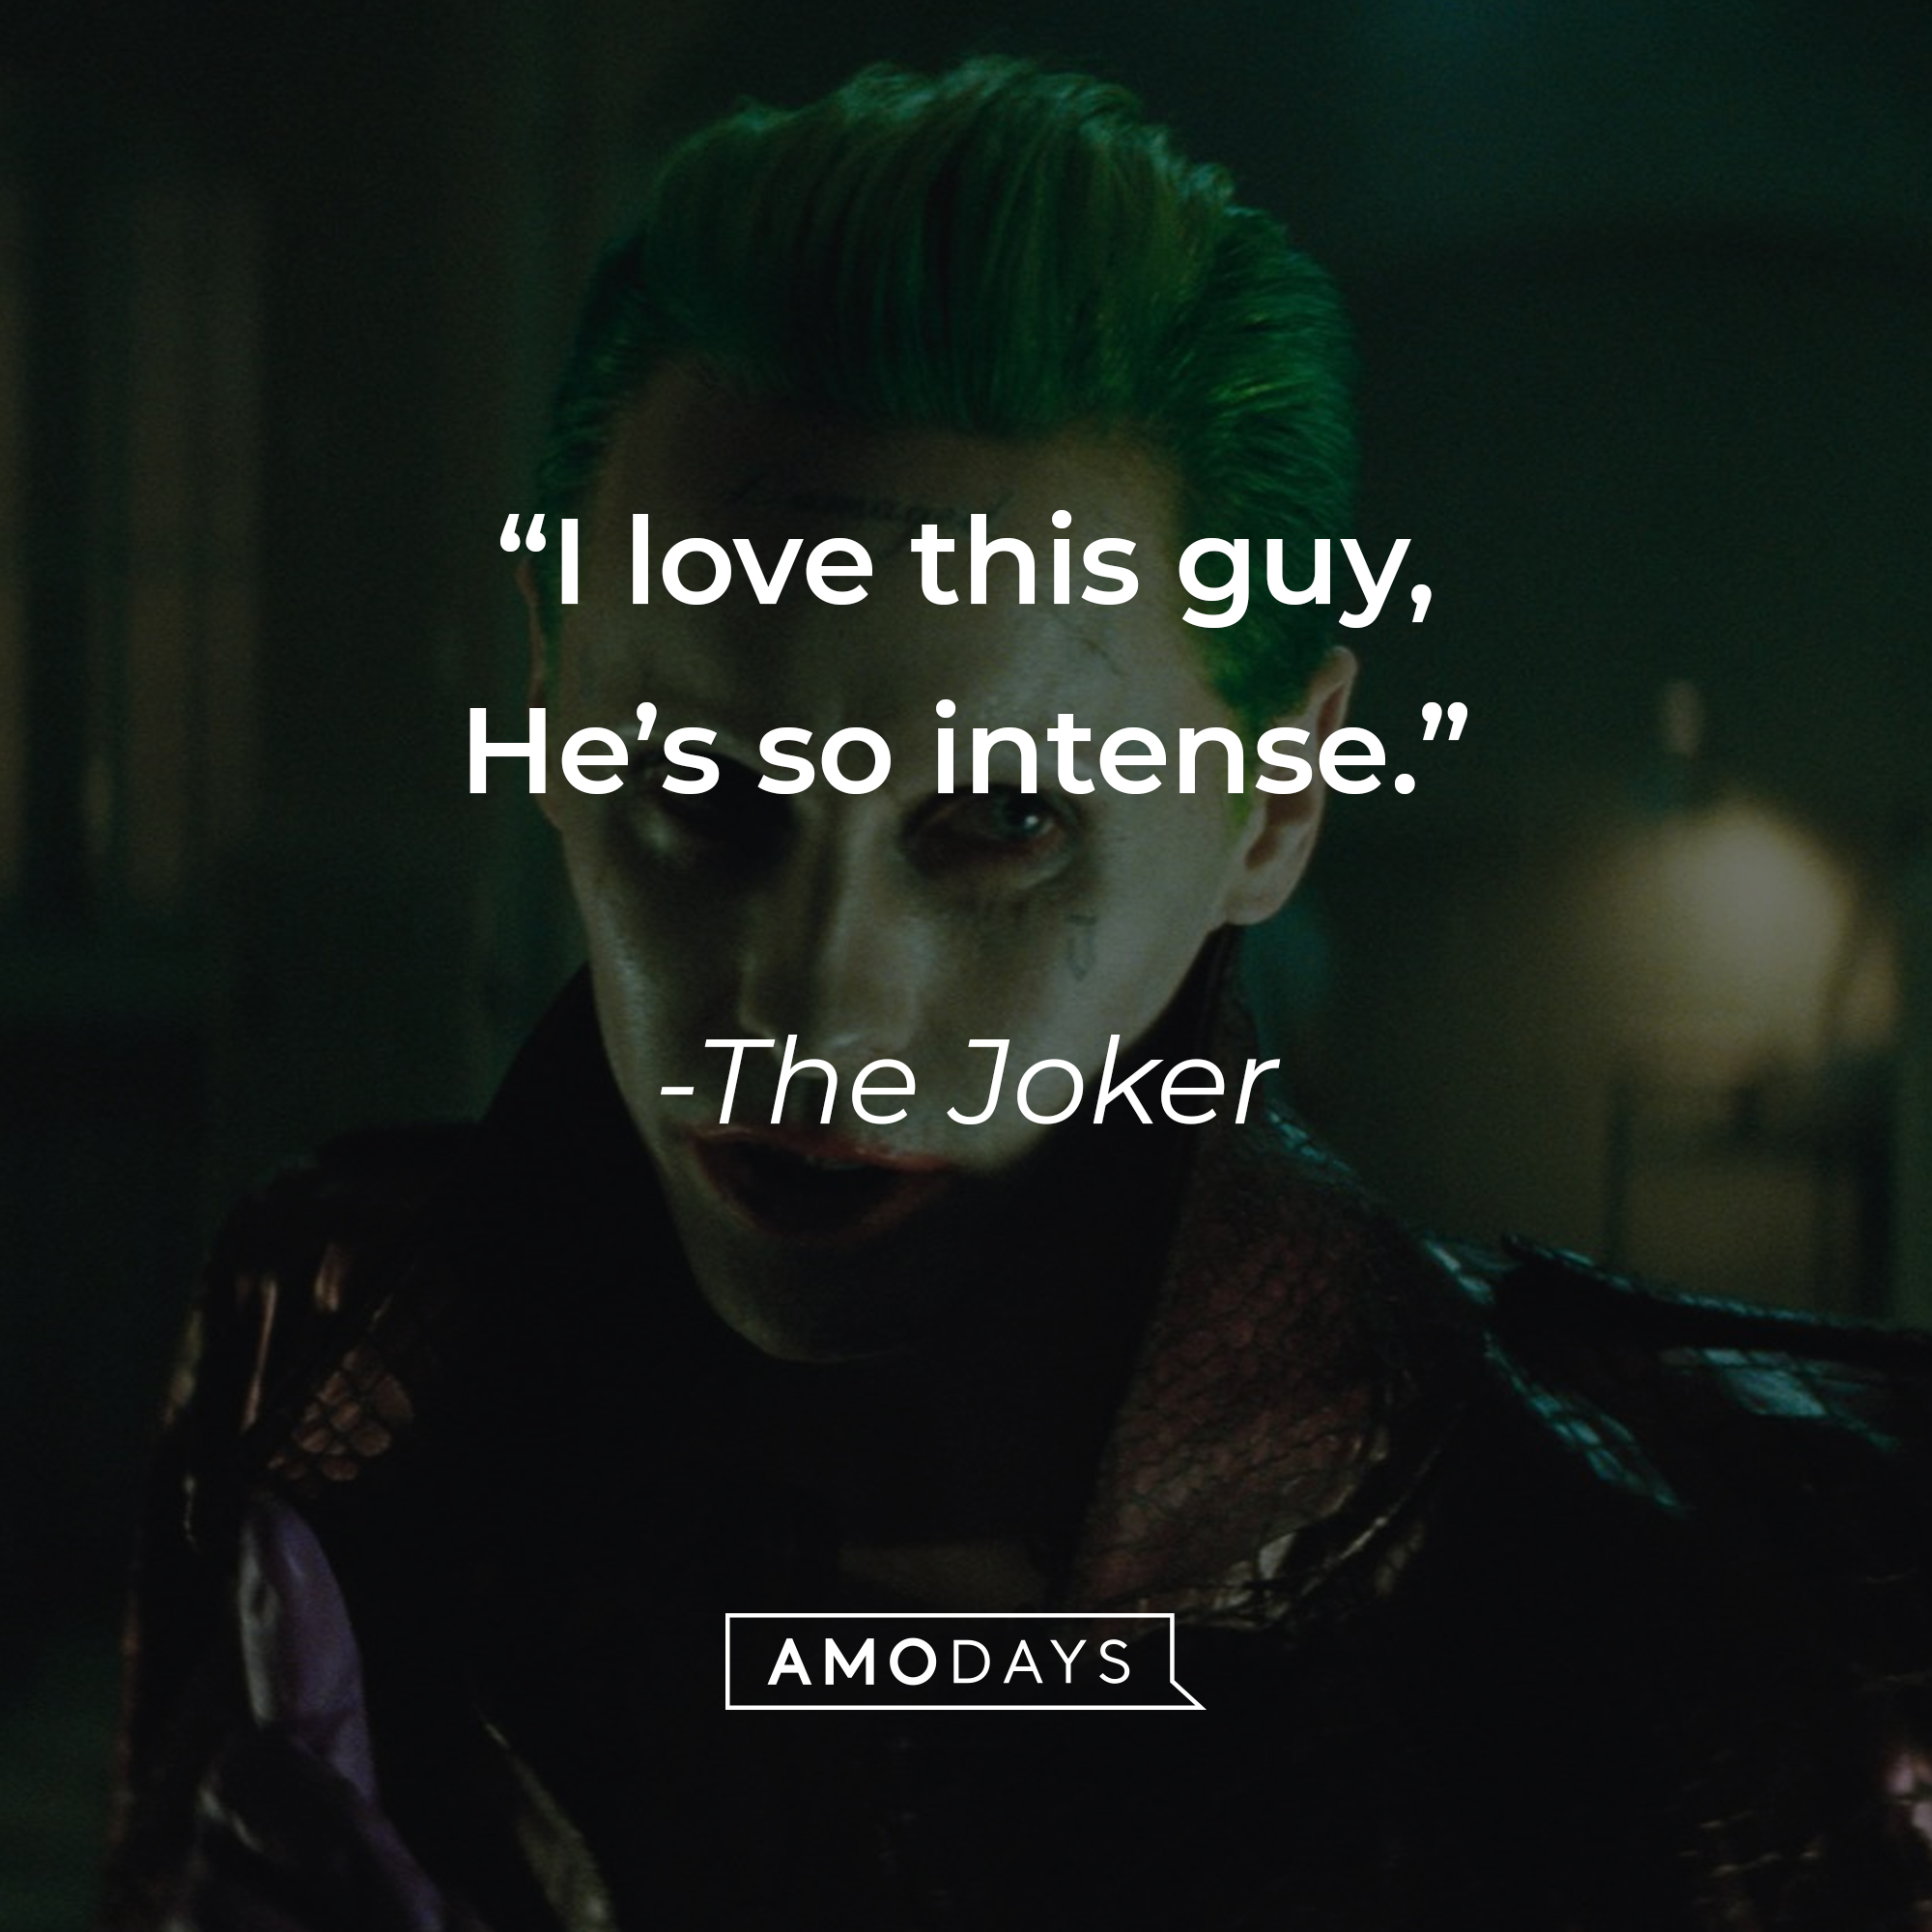 The Joker's quote: "I love this guy. He's so intense." | Source: facebook.com/thesuicidesquad